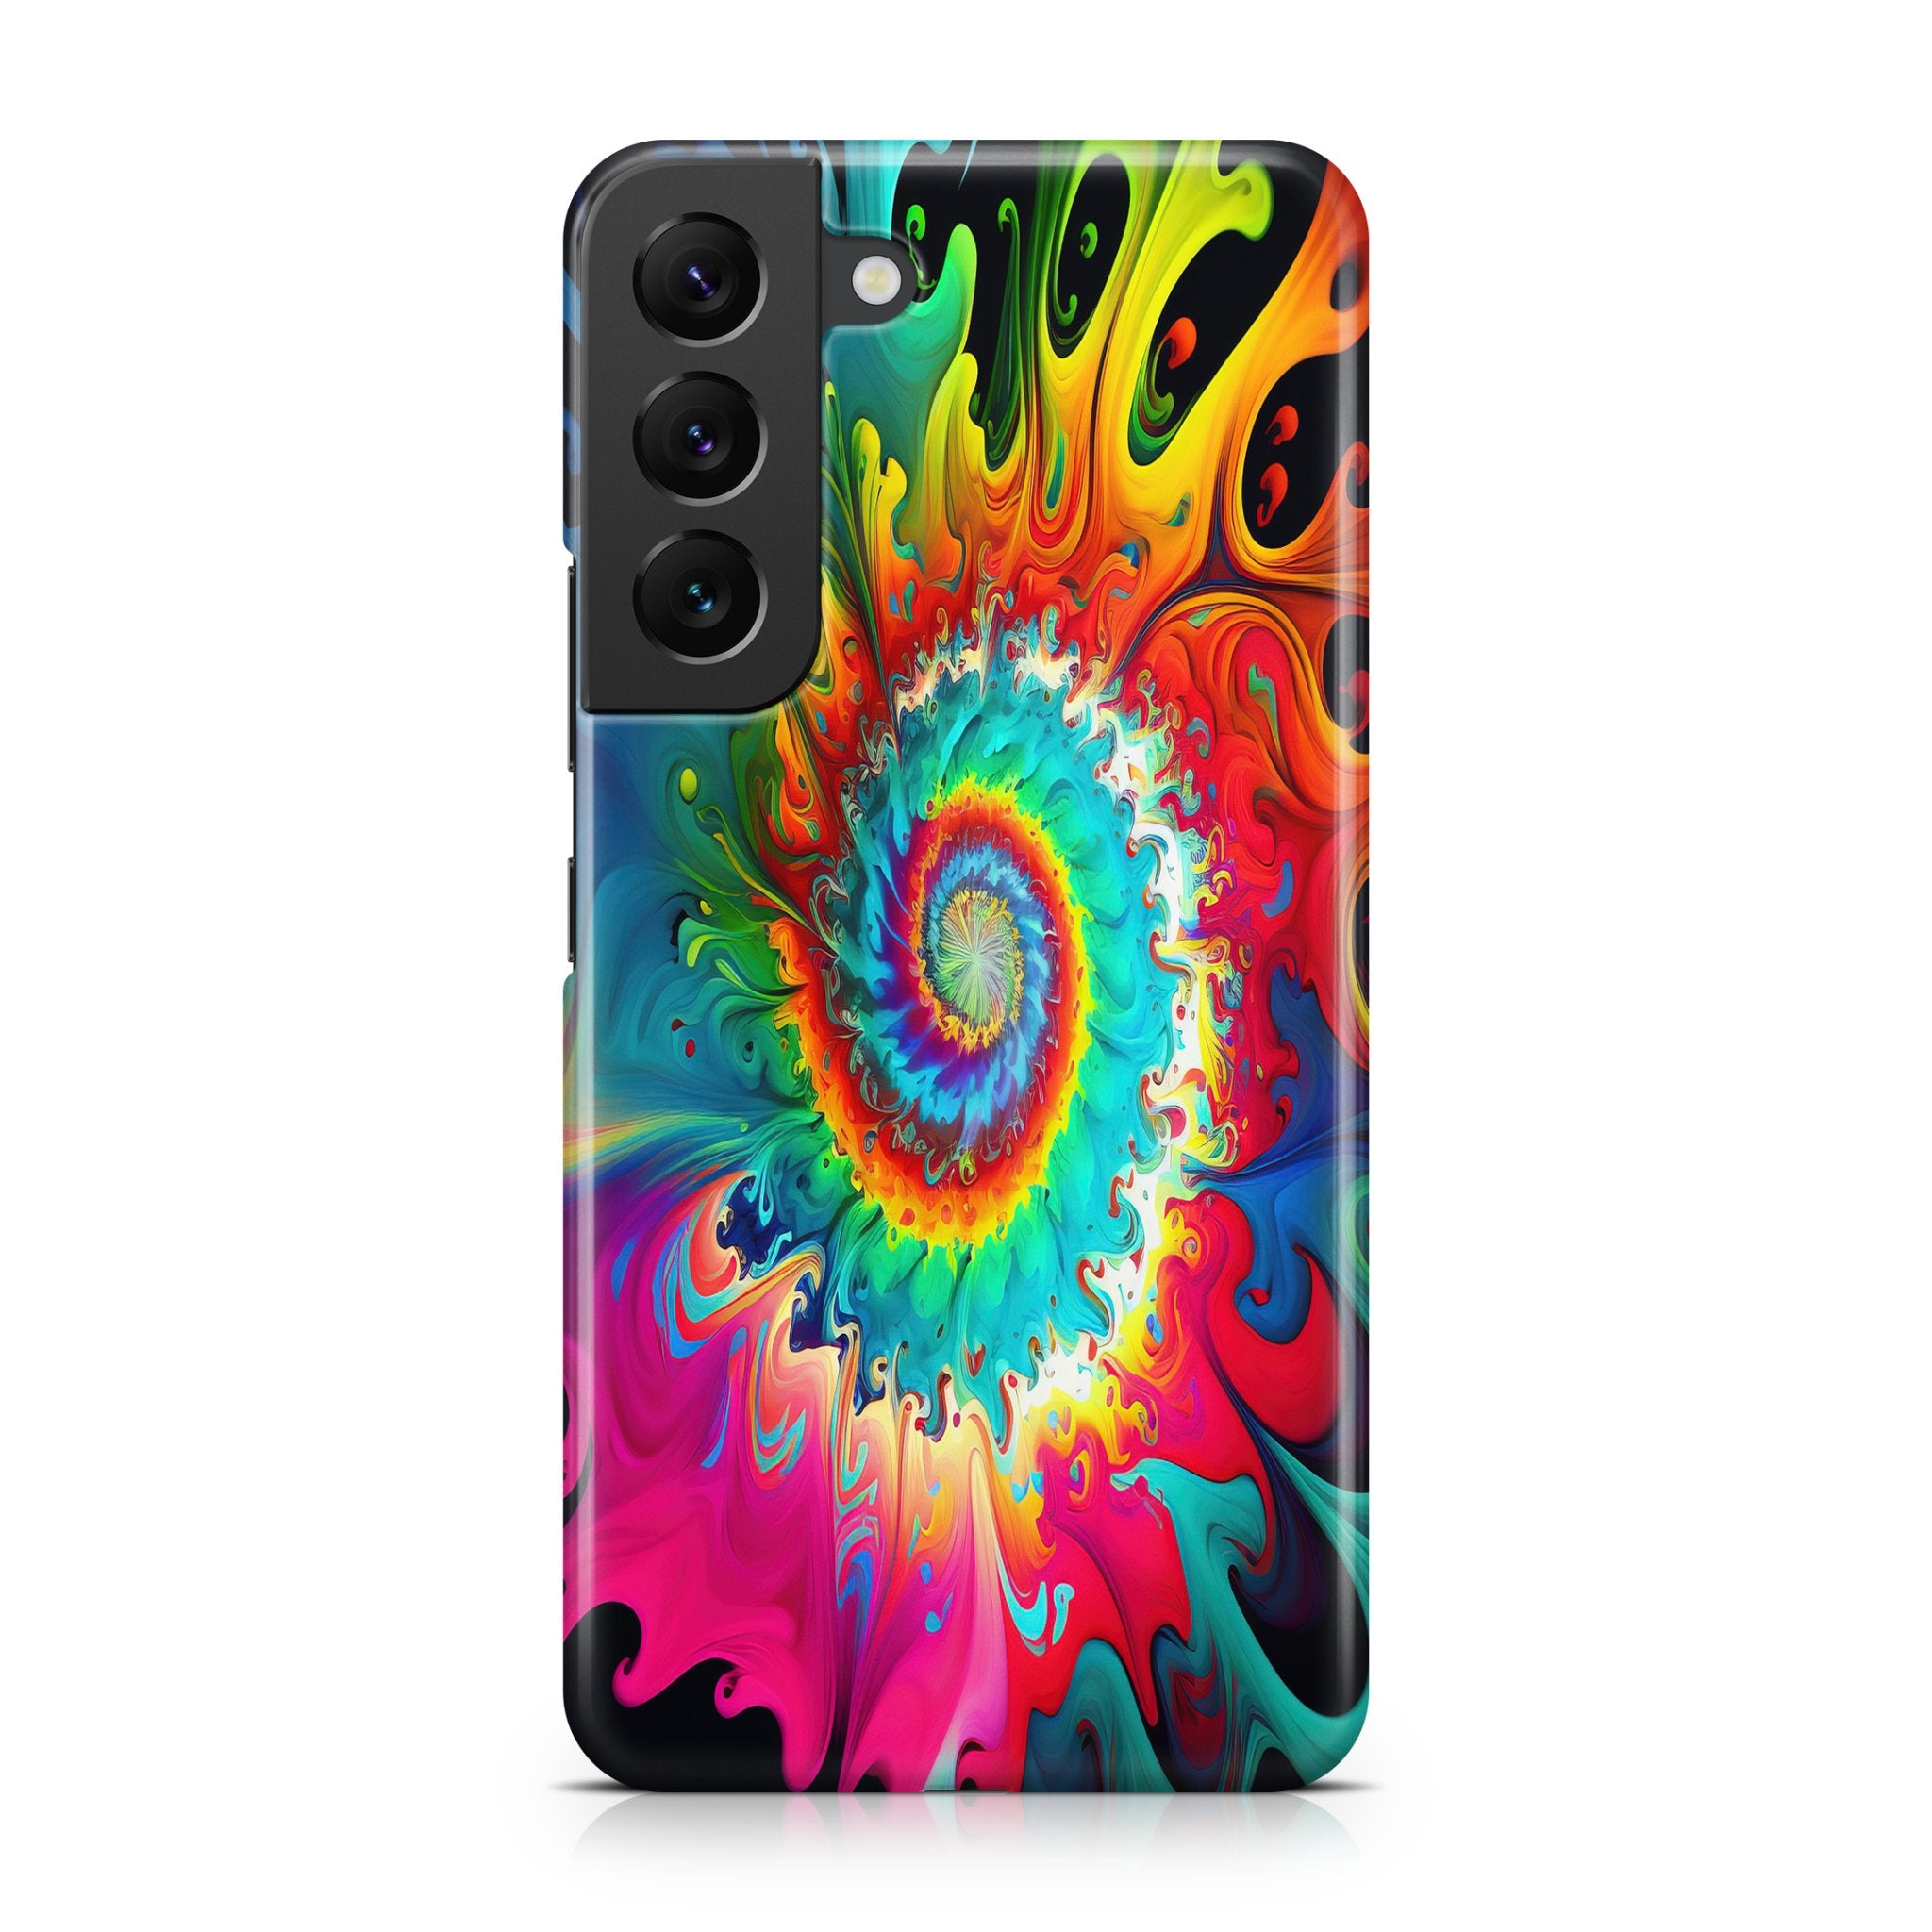 Twist of Fate - Samsung phone case designs by CaseSwagger